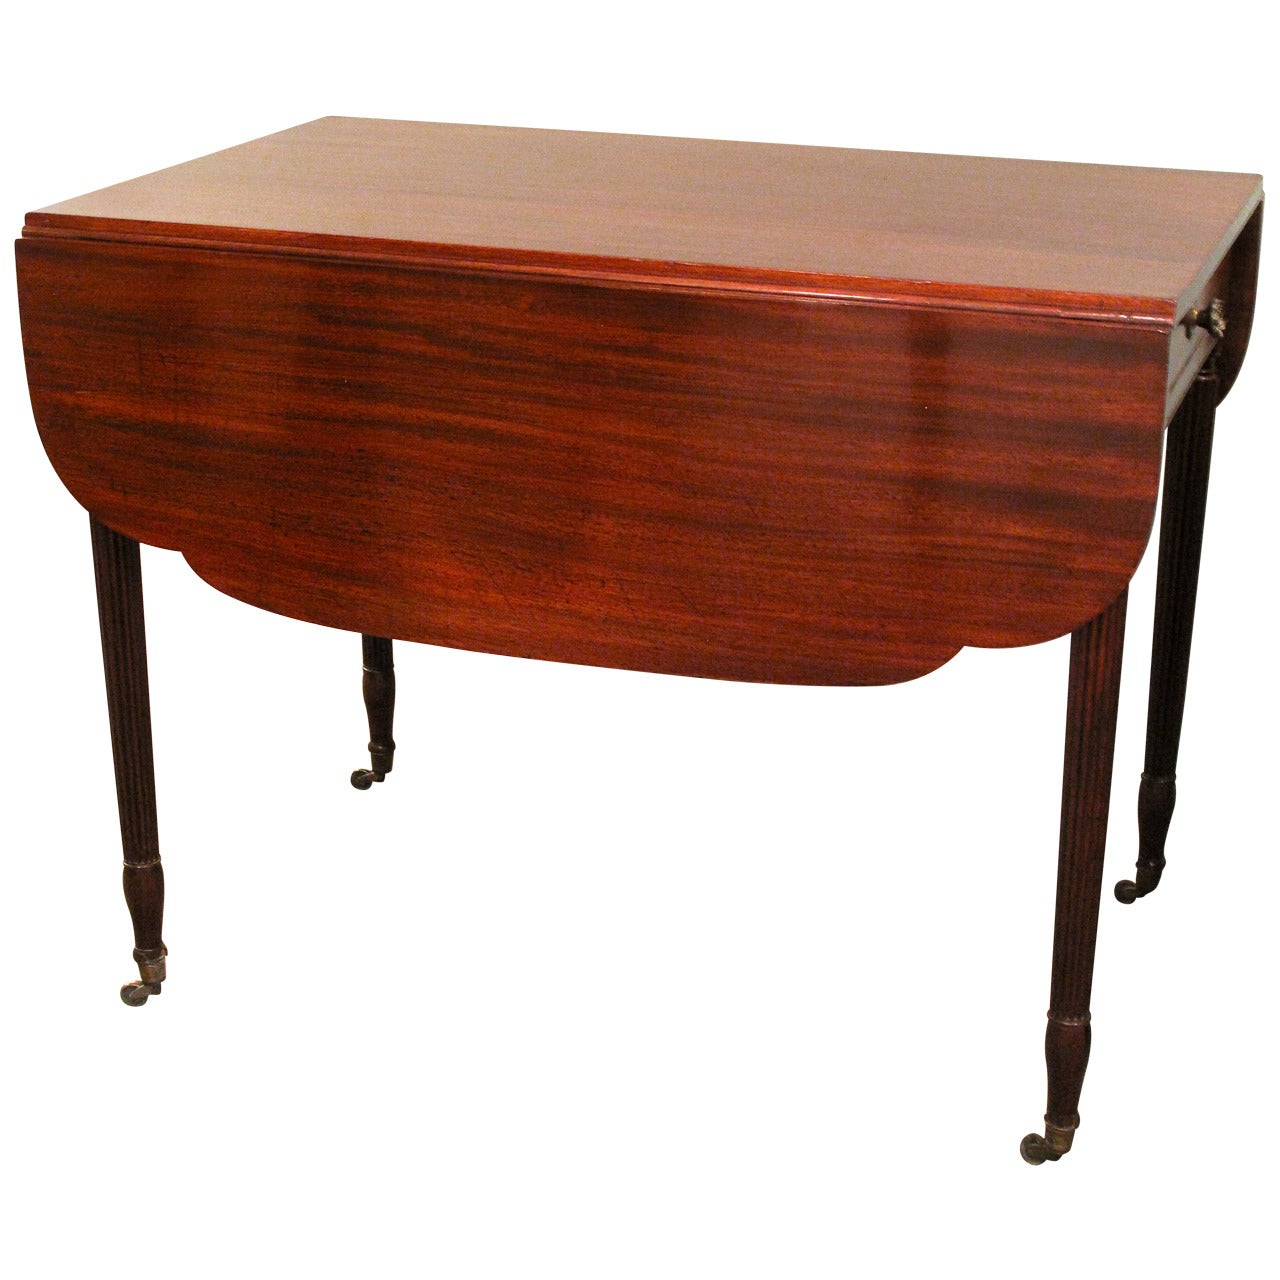 New York Federal Pembroke Table, Early 19th Century